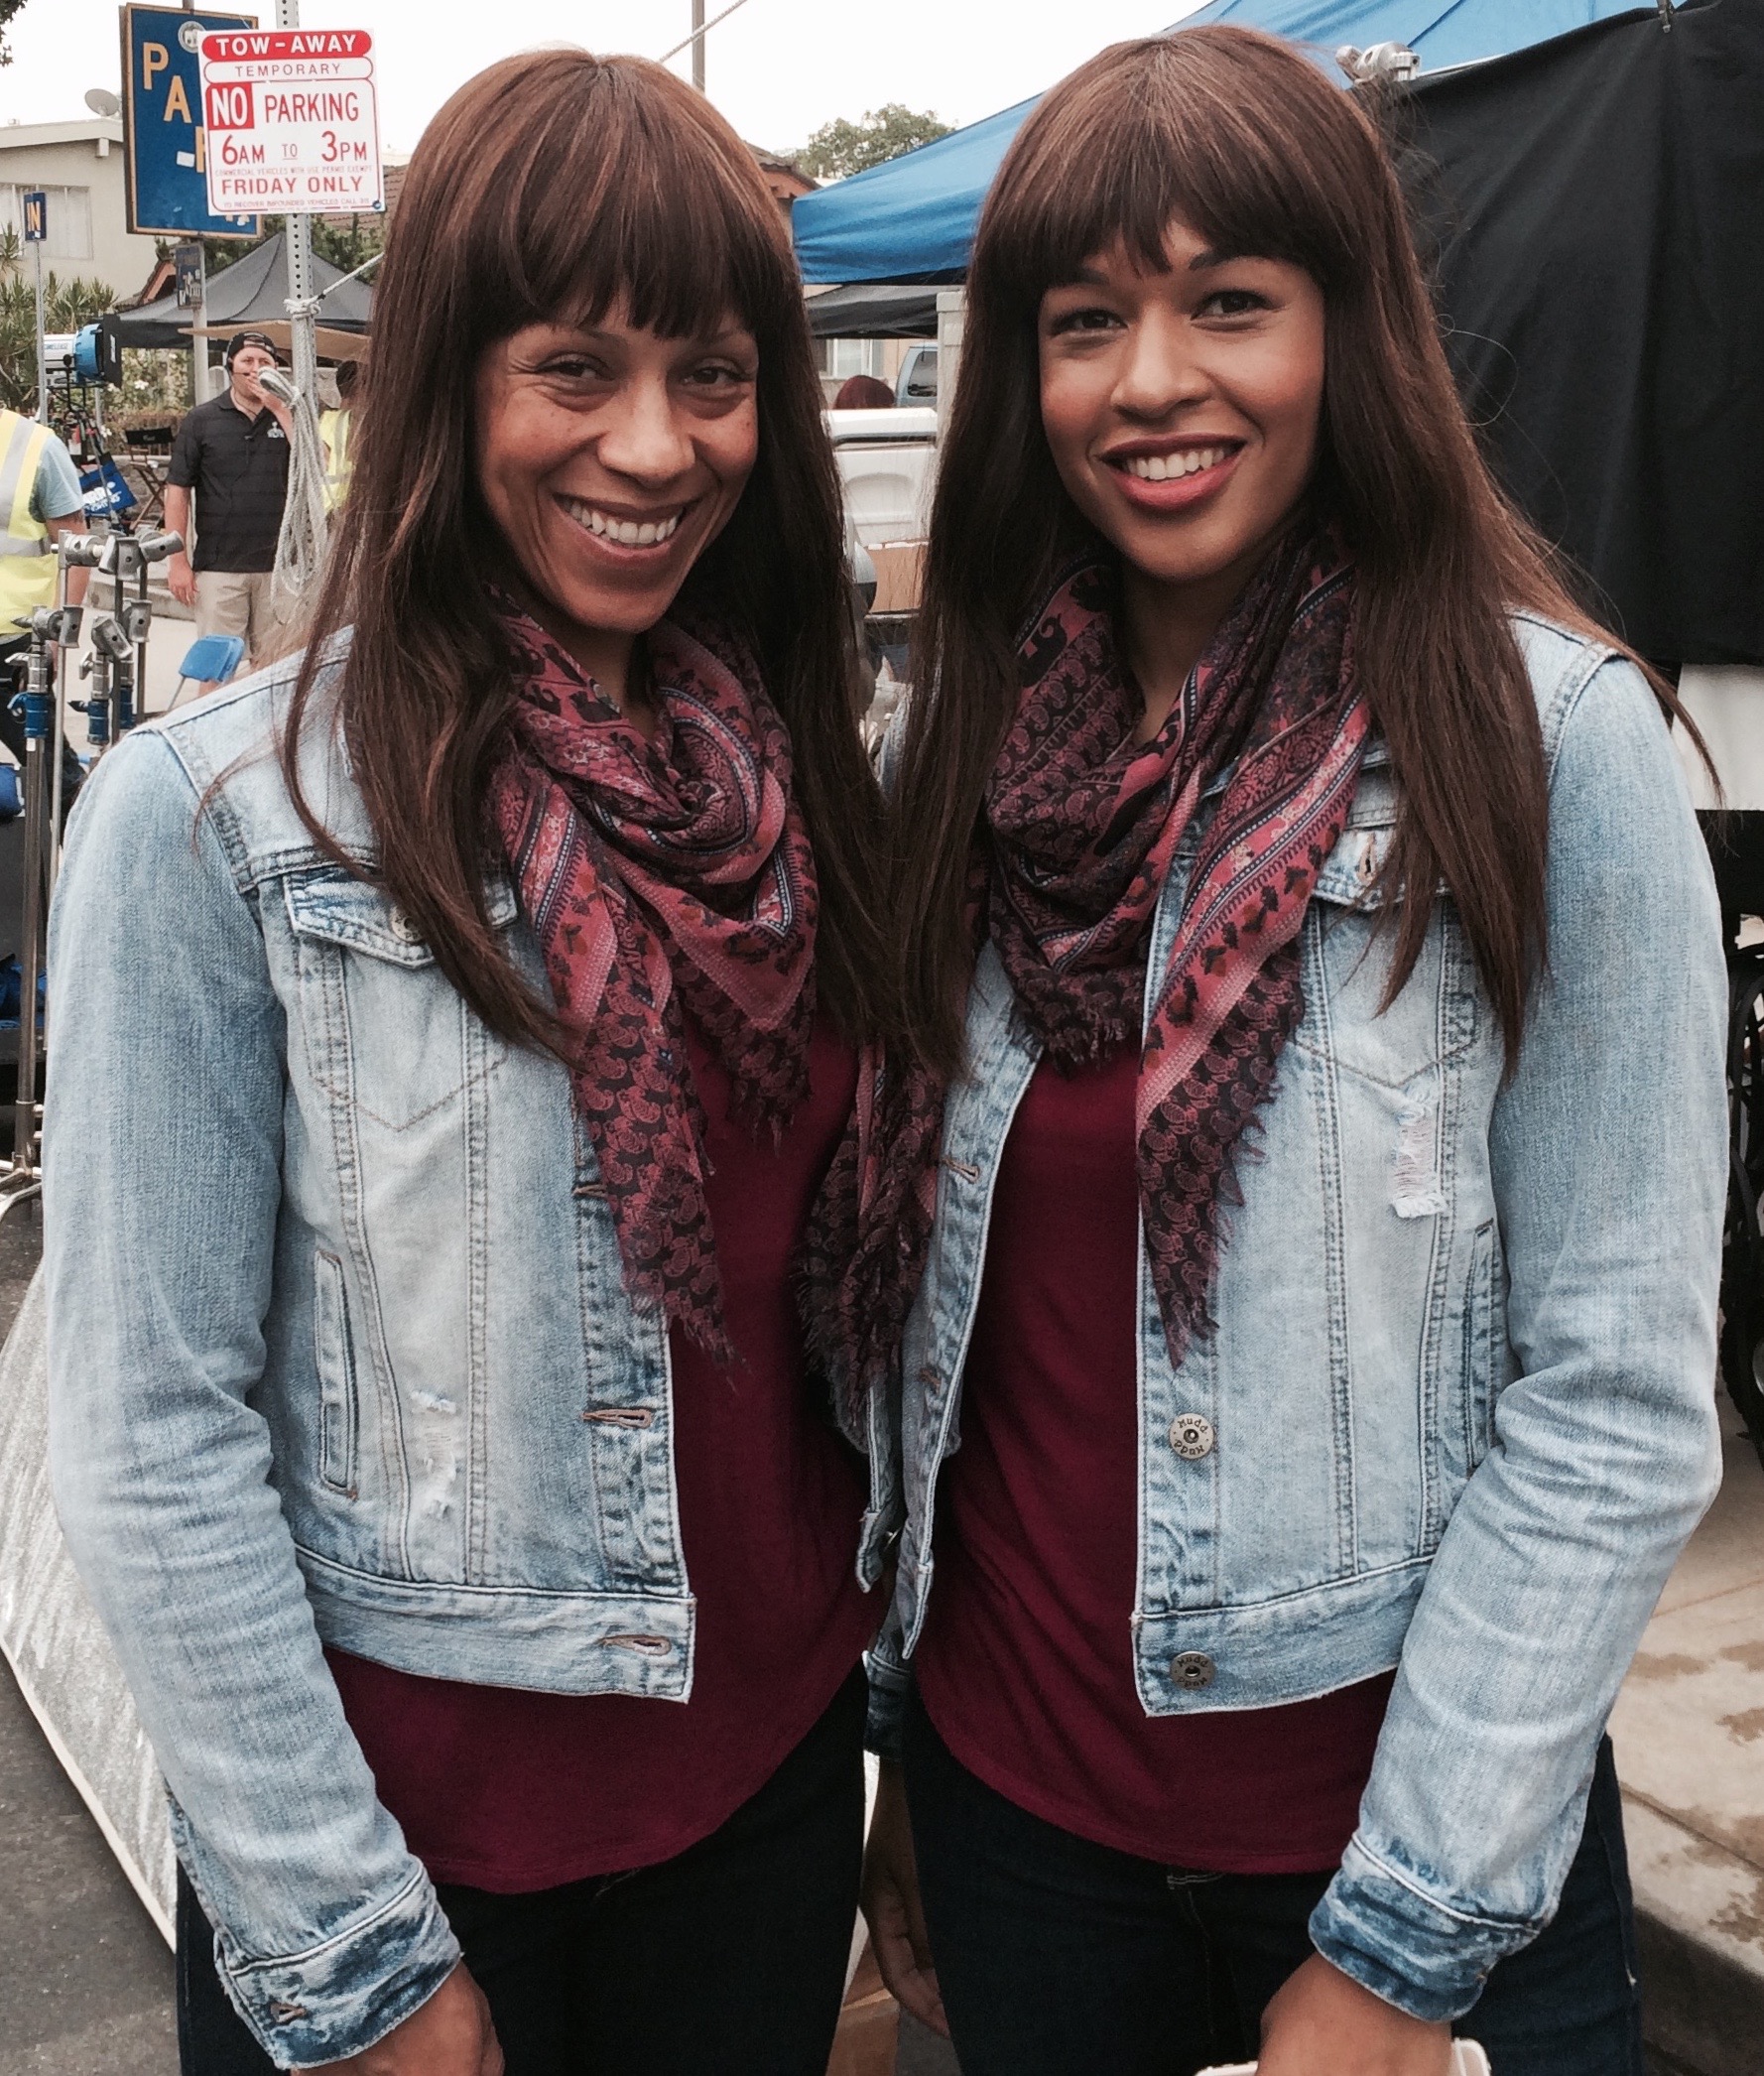 Petra Sprecher & Kali Hawk on set of Fifty Shades Of Black (2016). Pic approved for posting by producers.